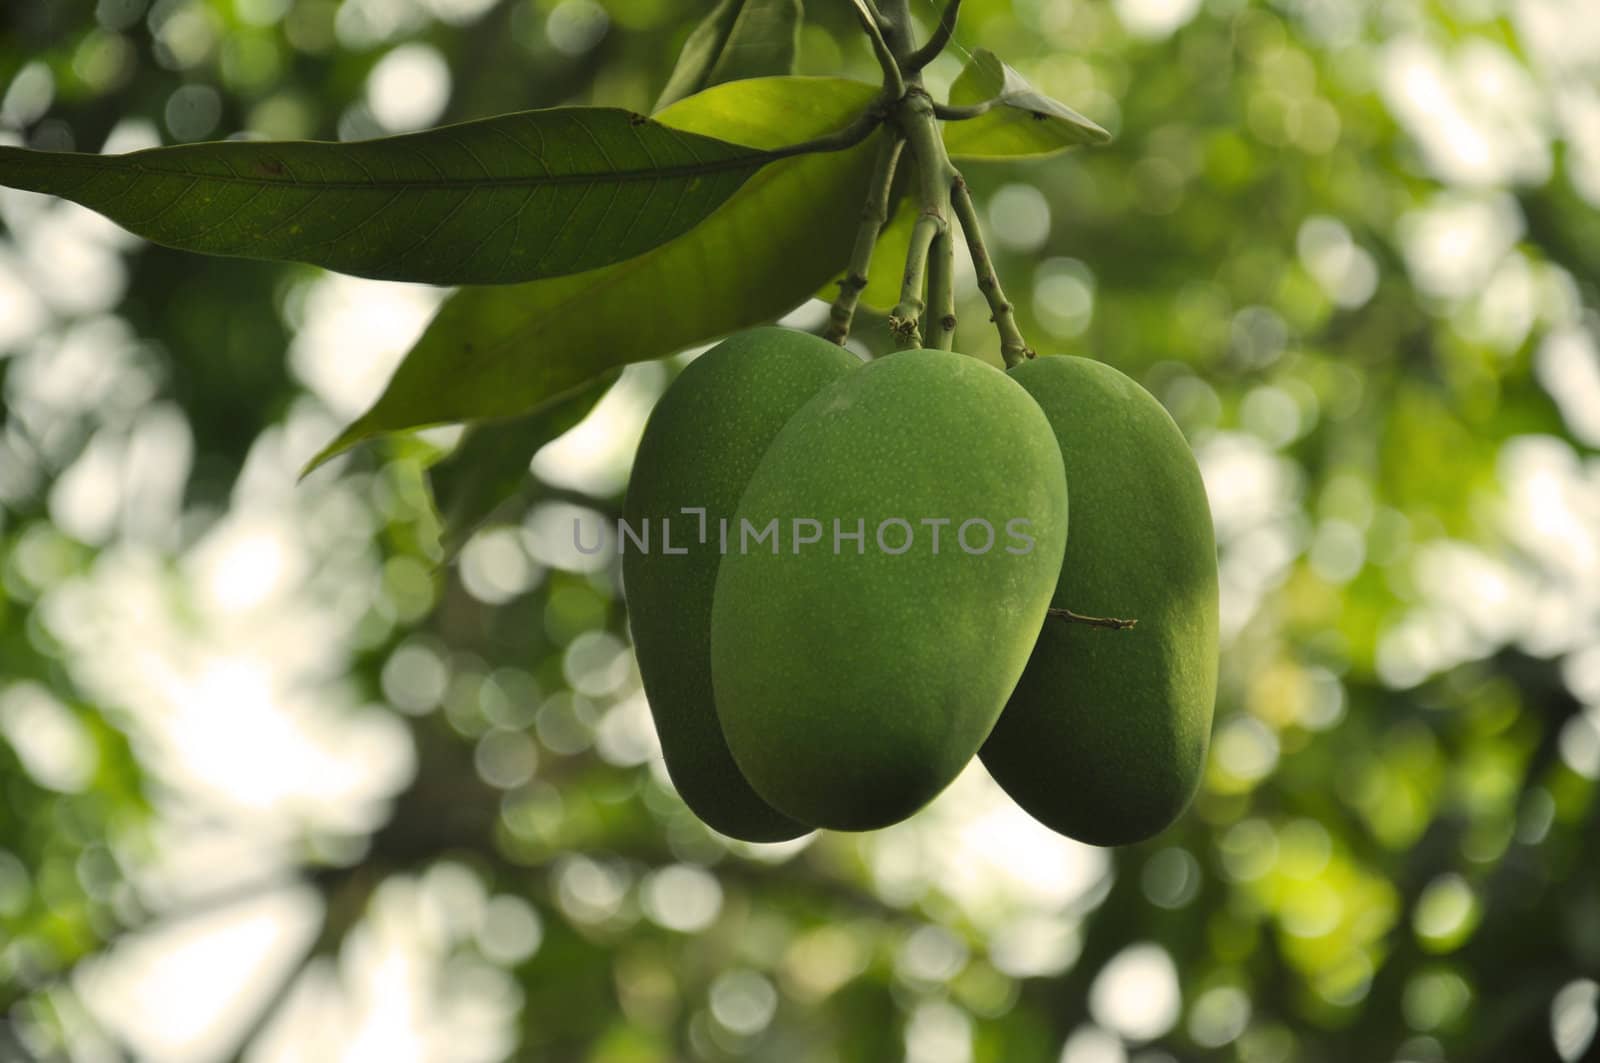 A Bunch of Mangoes growing on a tree in India